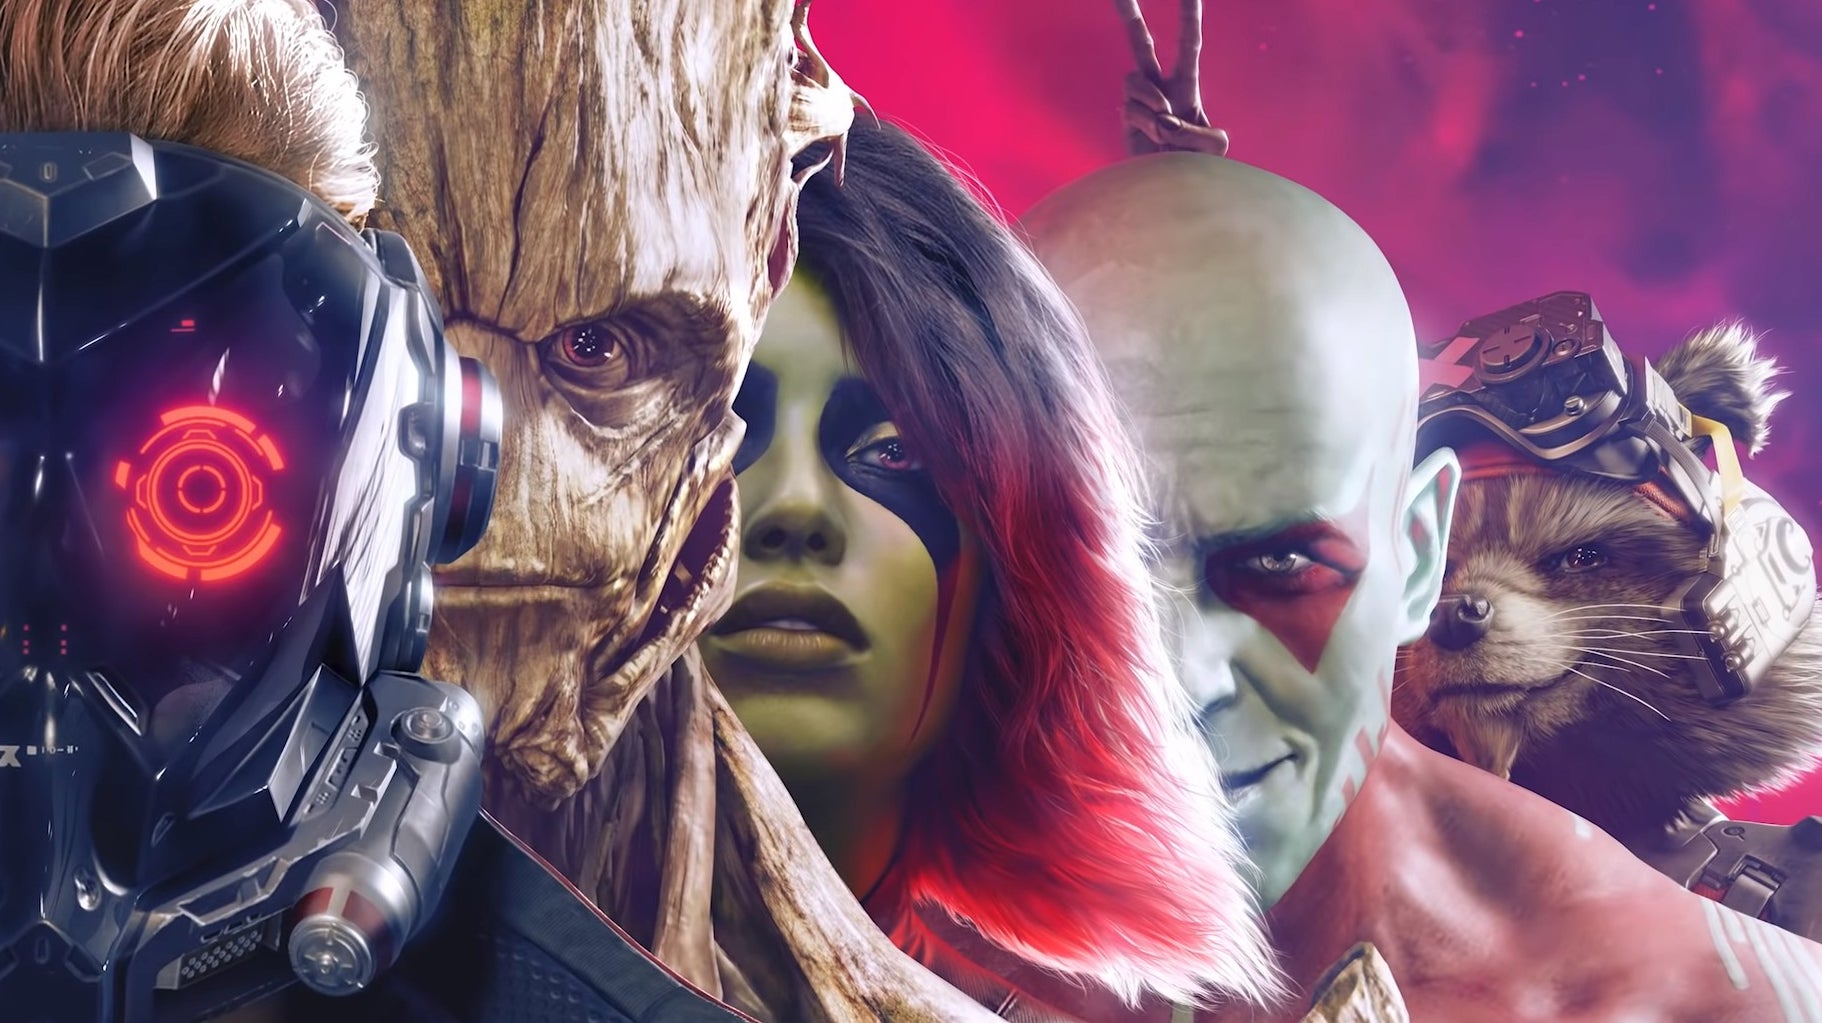 Image for Guardians of the Galaxy's unclosing fridge door joke inspired by Modern Family, creative director says